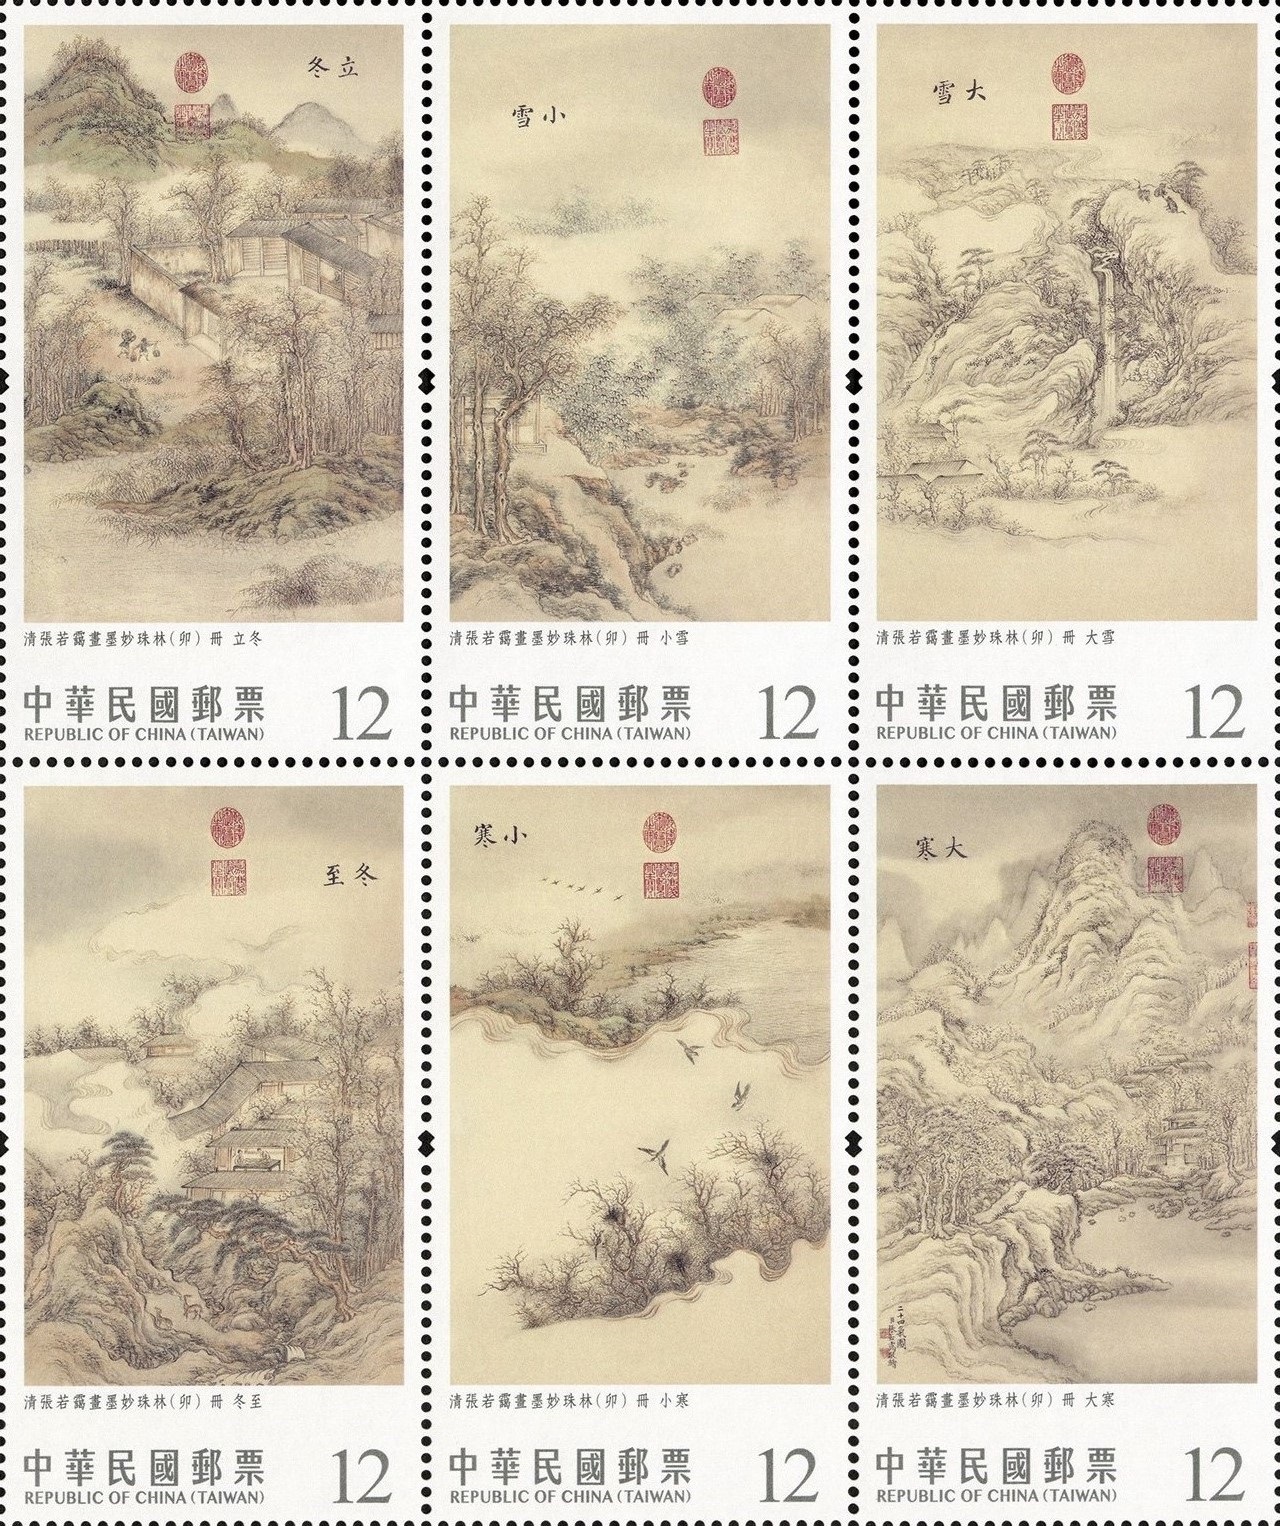 Ancient Chinese Paintings from the NPM Postage Stamps — 24 Solar Terms (Winter)